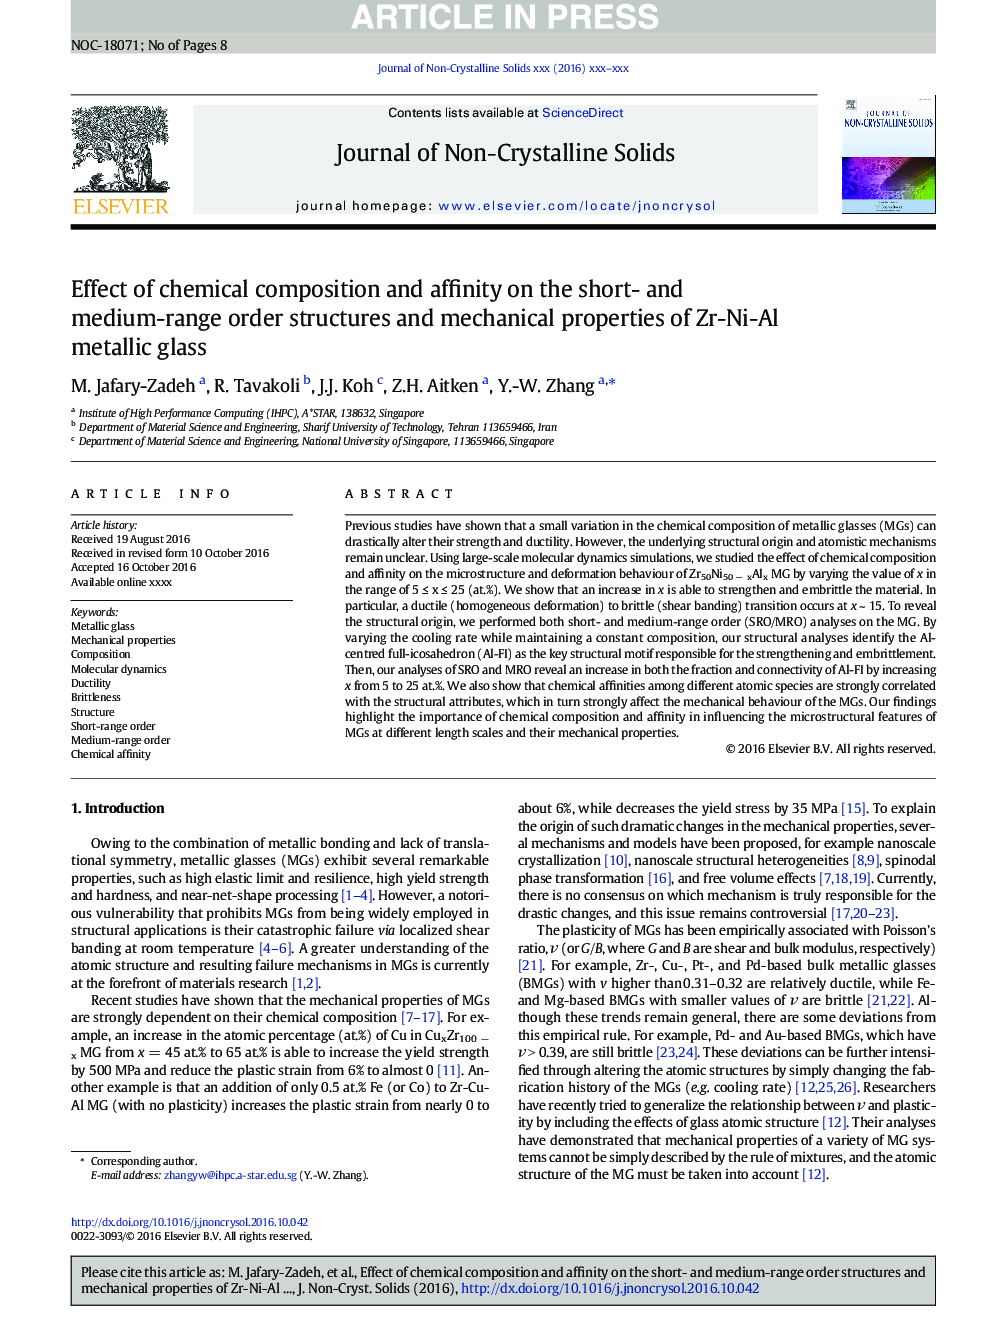 Effect of chemical composition and affinity on the short- and medium-range order structures and mechanical properties of Zr-Ni-Al metallic glass